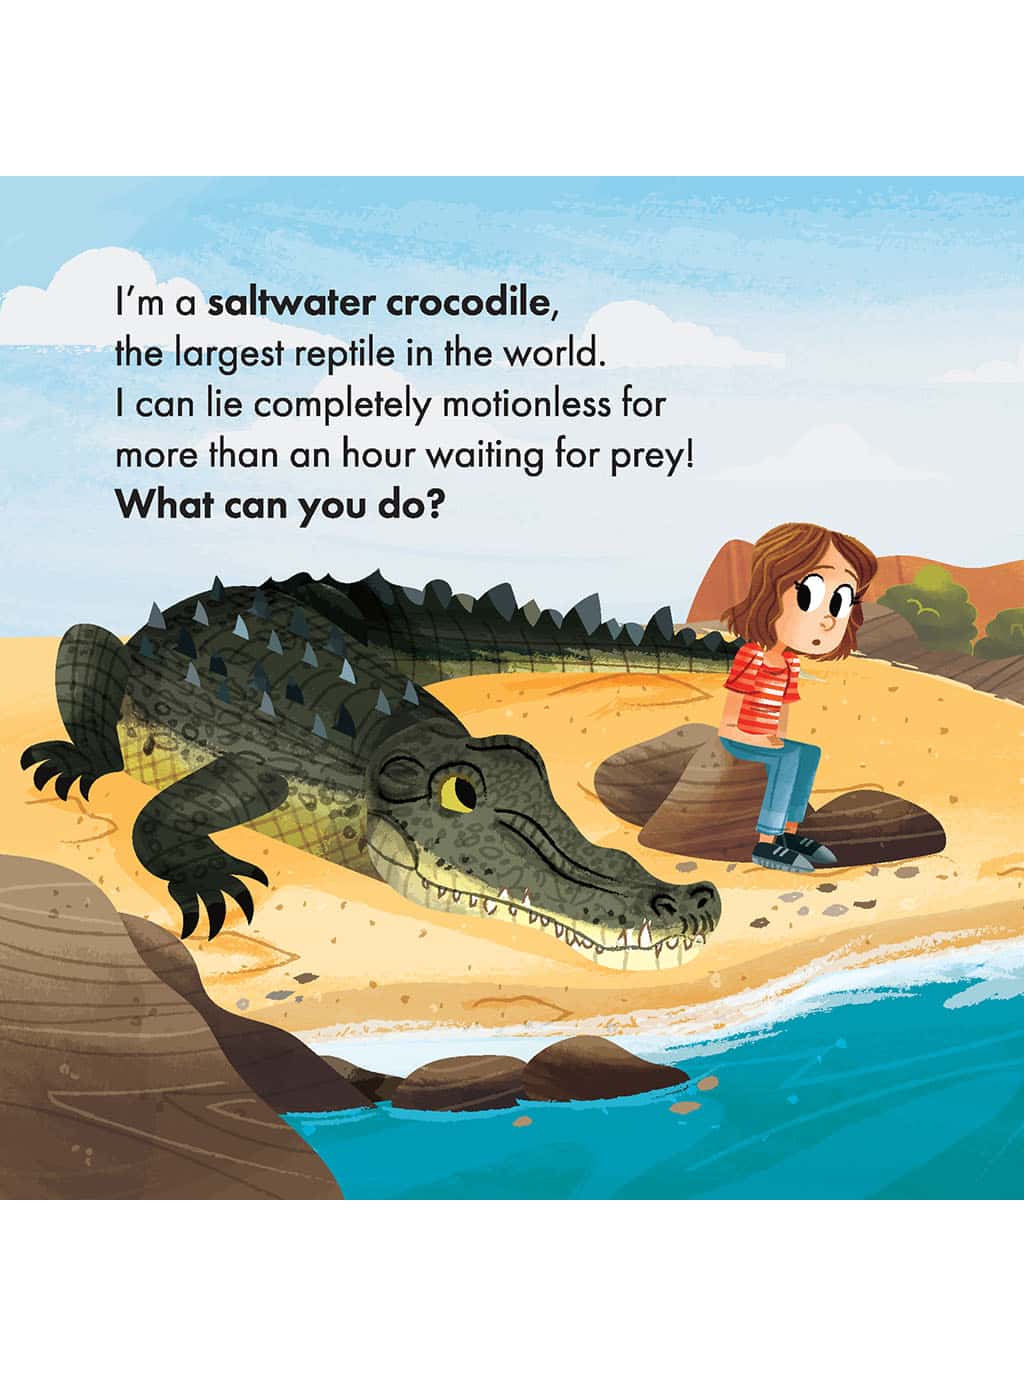 What Can You Do Australia creation science for kids board book saltwater crocodile page